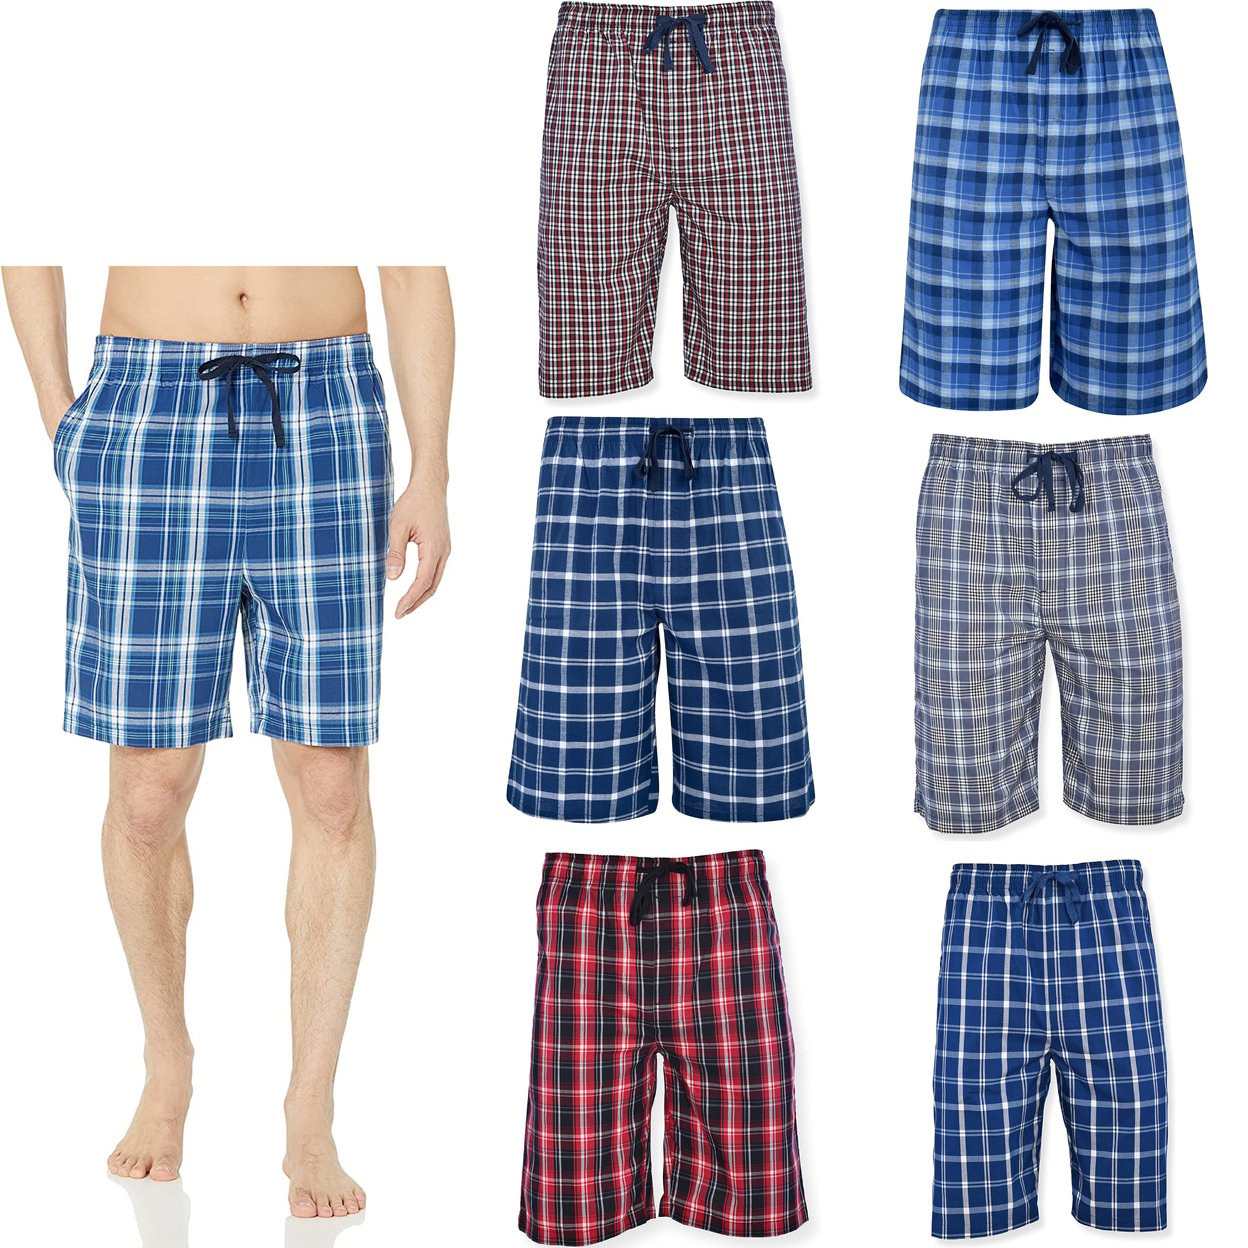 2-Pack: Men's Ultra Soft Plaid Lounge Pajama Sleep Wear Shorts - Red& Red, Small